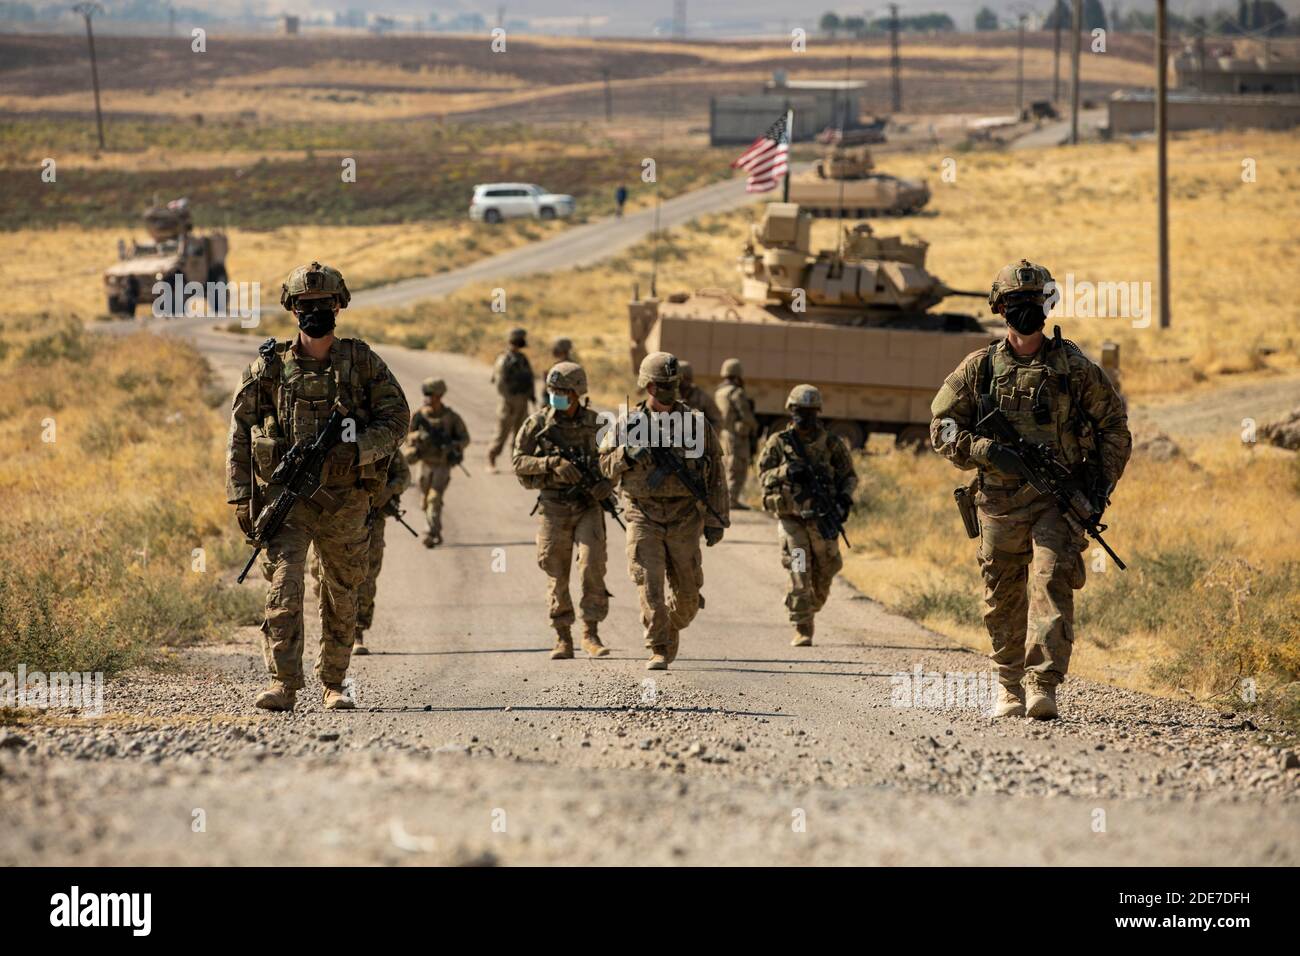 U.S. Army soldiers patrol a road in Northern Syria October 26, 2020 near Qamishli, Syria. The soldiers are in Syria to support Combined Joint Task Force Operation Inherent Resolve against the Islamic State fighters. Stock Photo